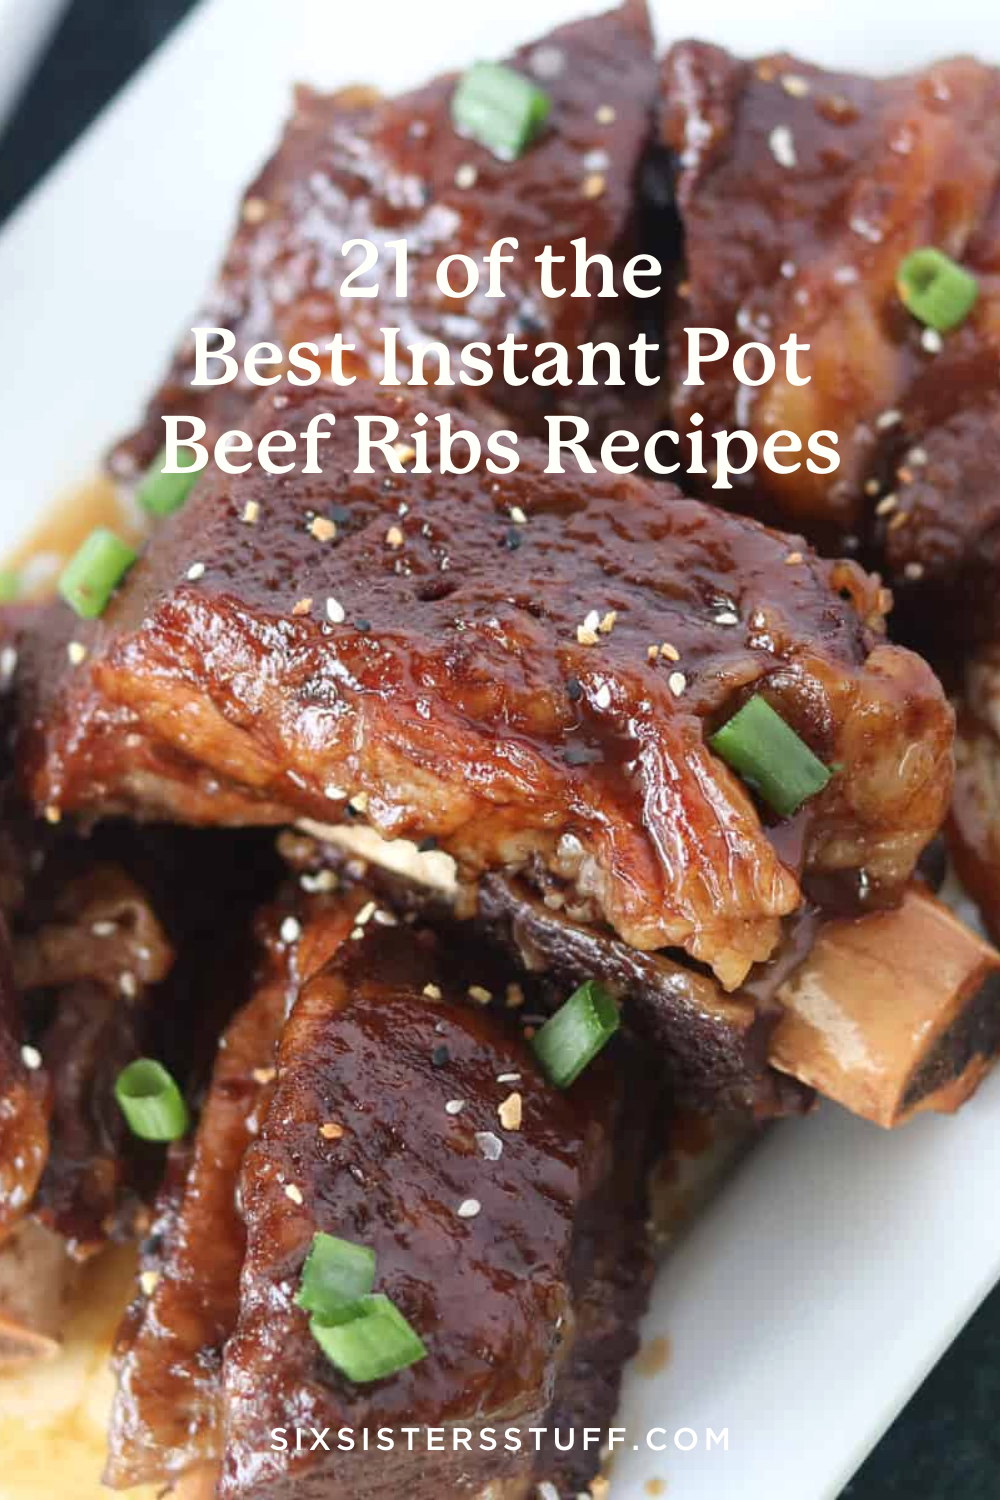 21 of the Best Instant Pot Beef Ribs Recipes